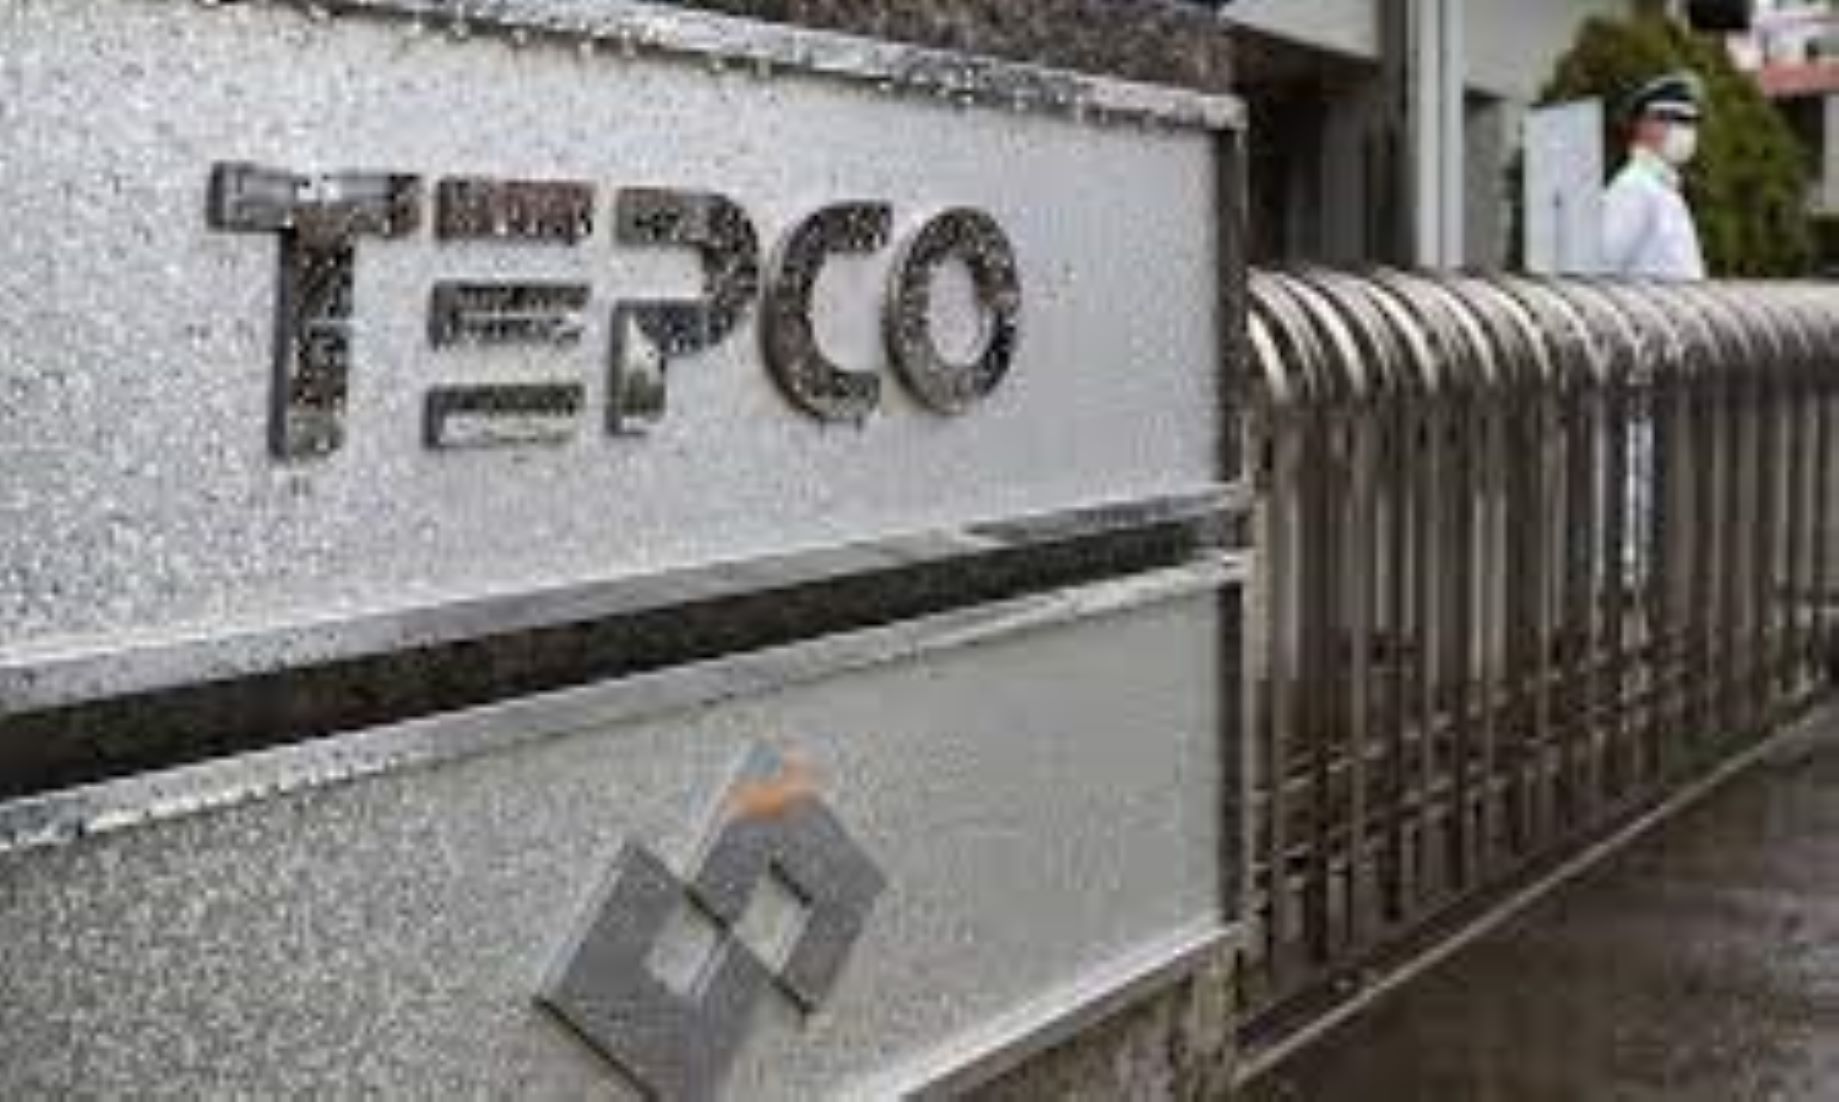 Japan’s TEPCO Seeks To Raise Household Electricity Prices By 30 Percent